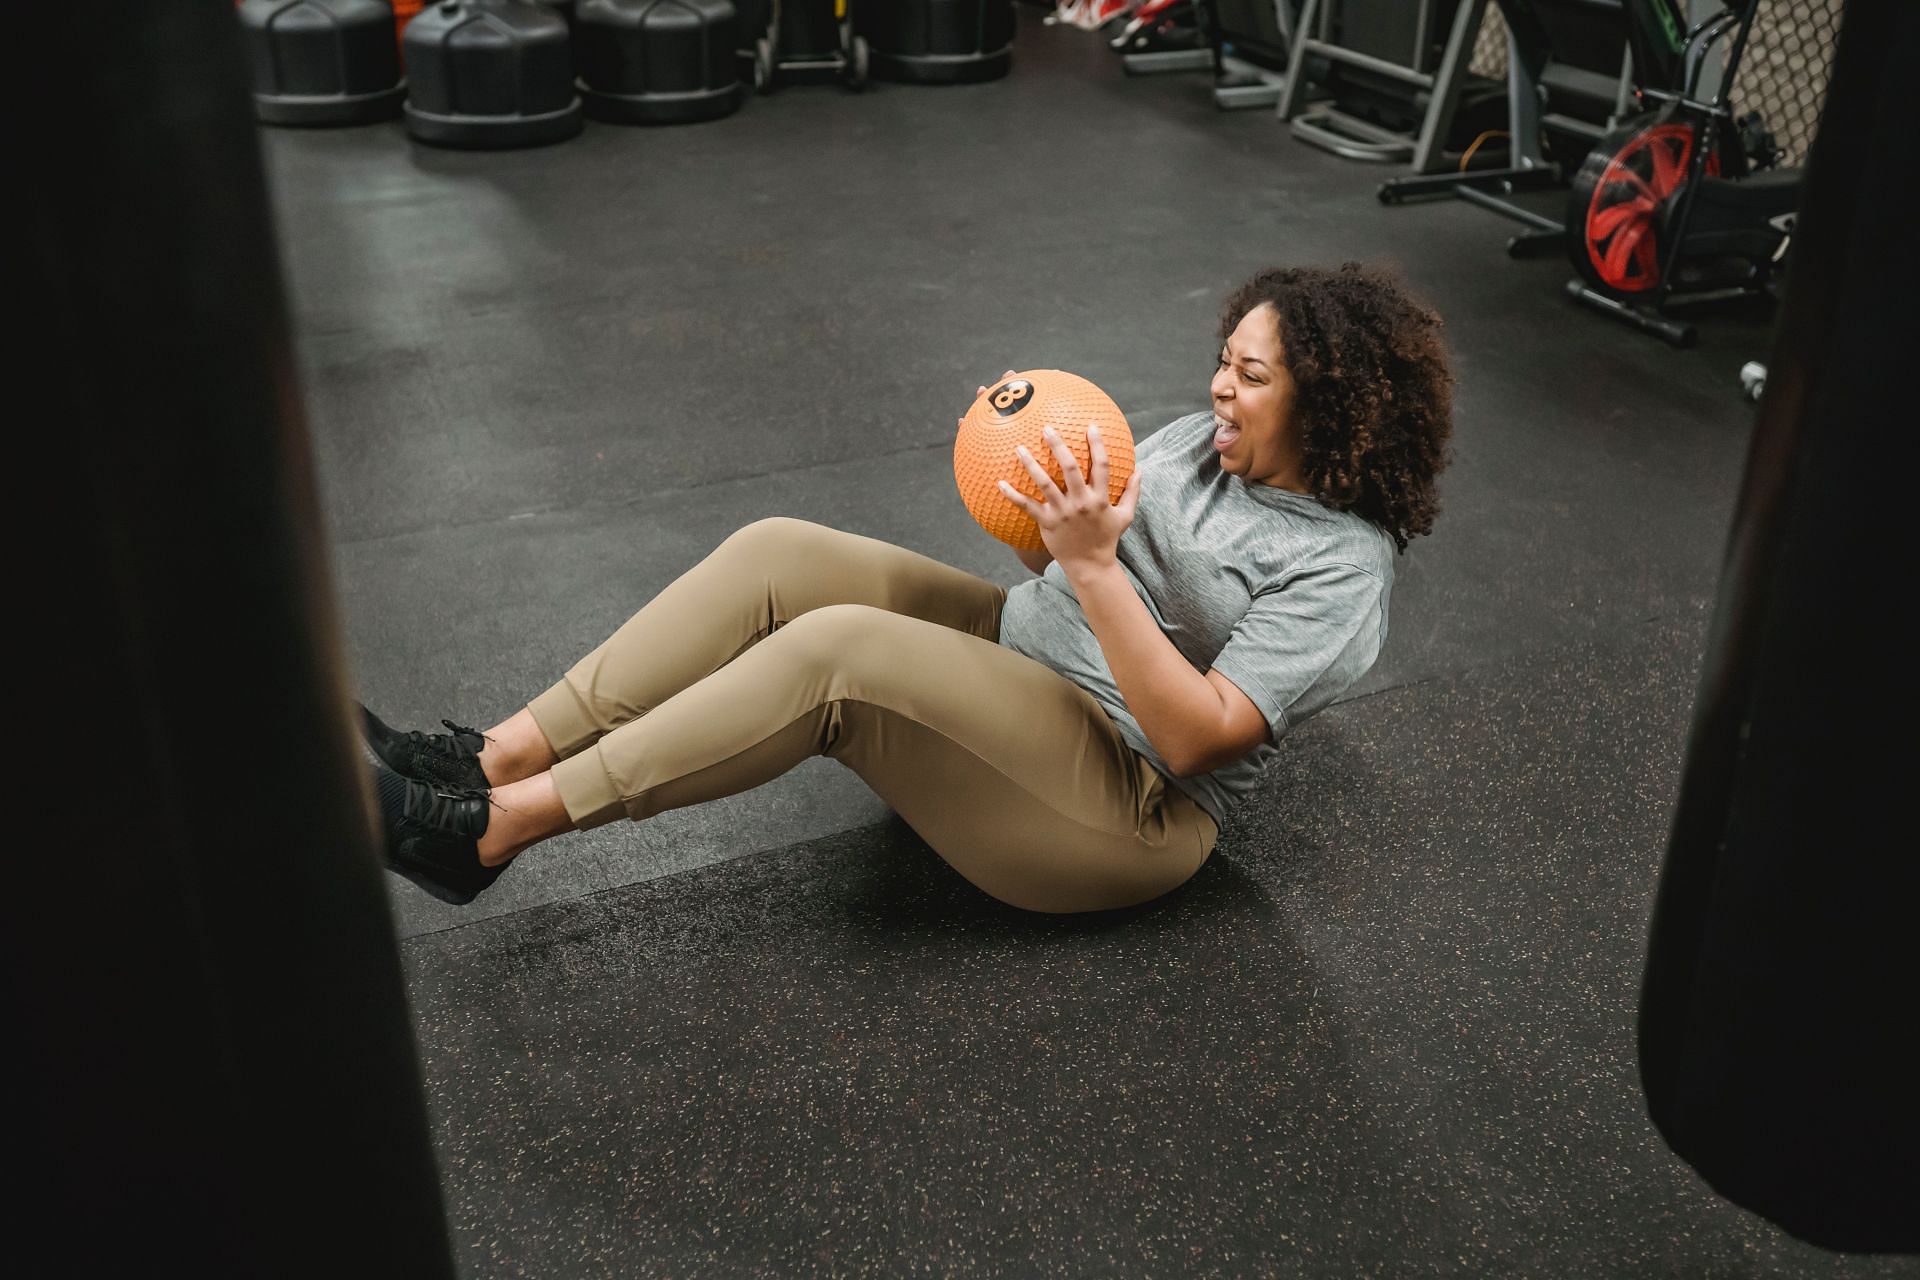 HIIT is a type of workout for weight loss that alternates between high-intensity bursts of activity and periods of rest. (Photo by Julia Larson/Pexels)